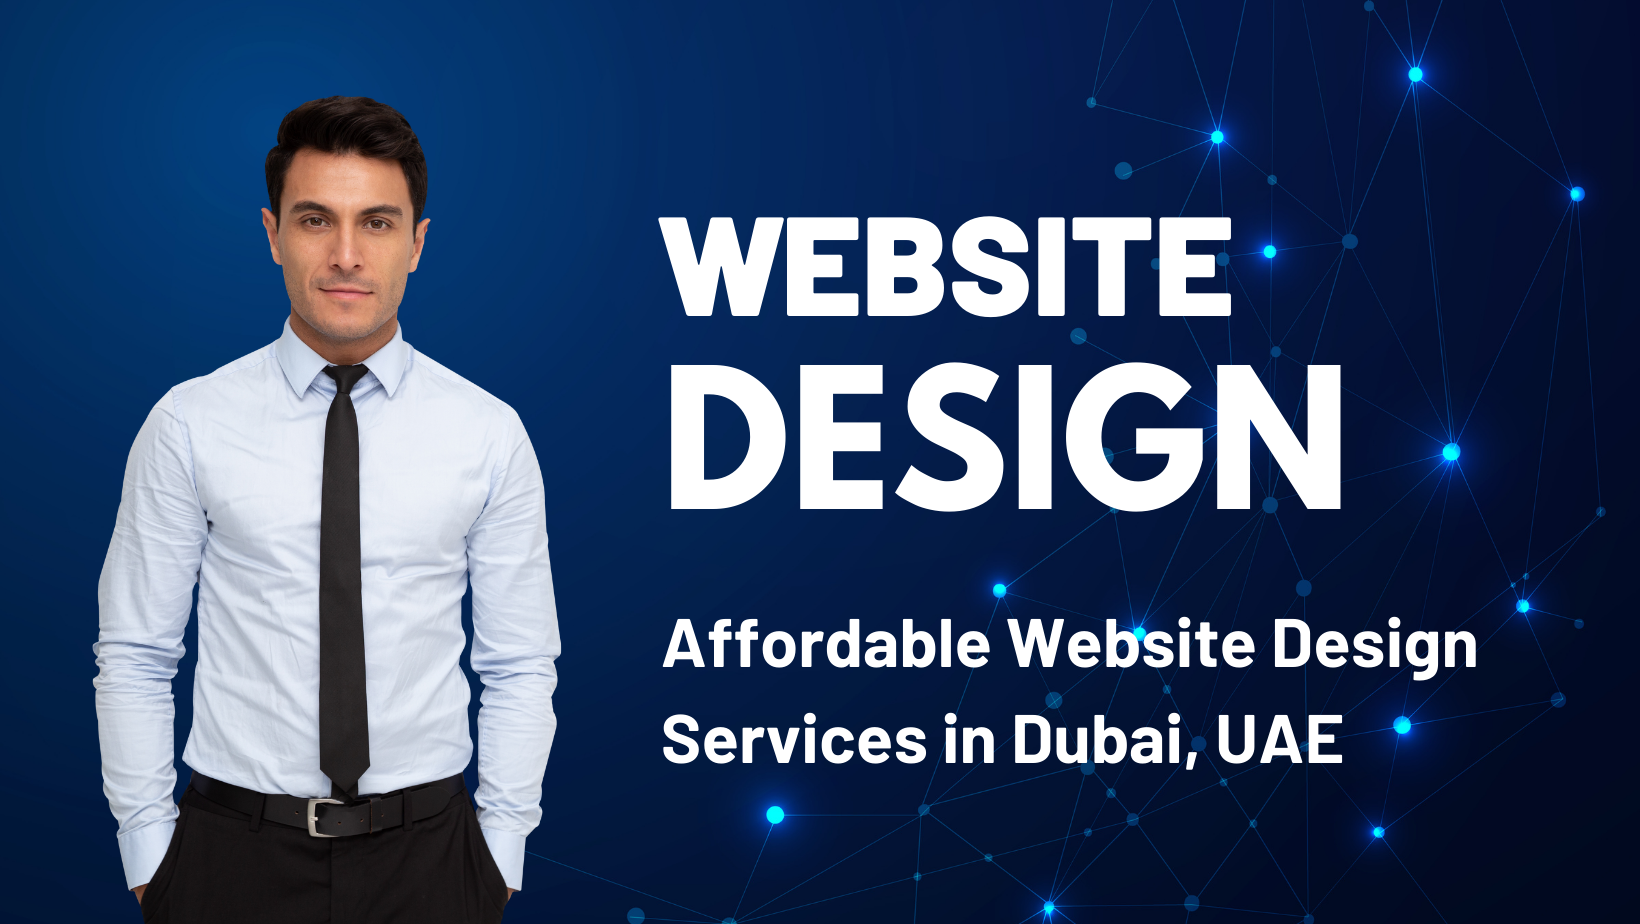 Affordable Web Design Dubai Services : Exceptional Value at Unmatched Prices